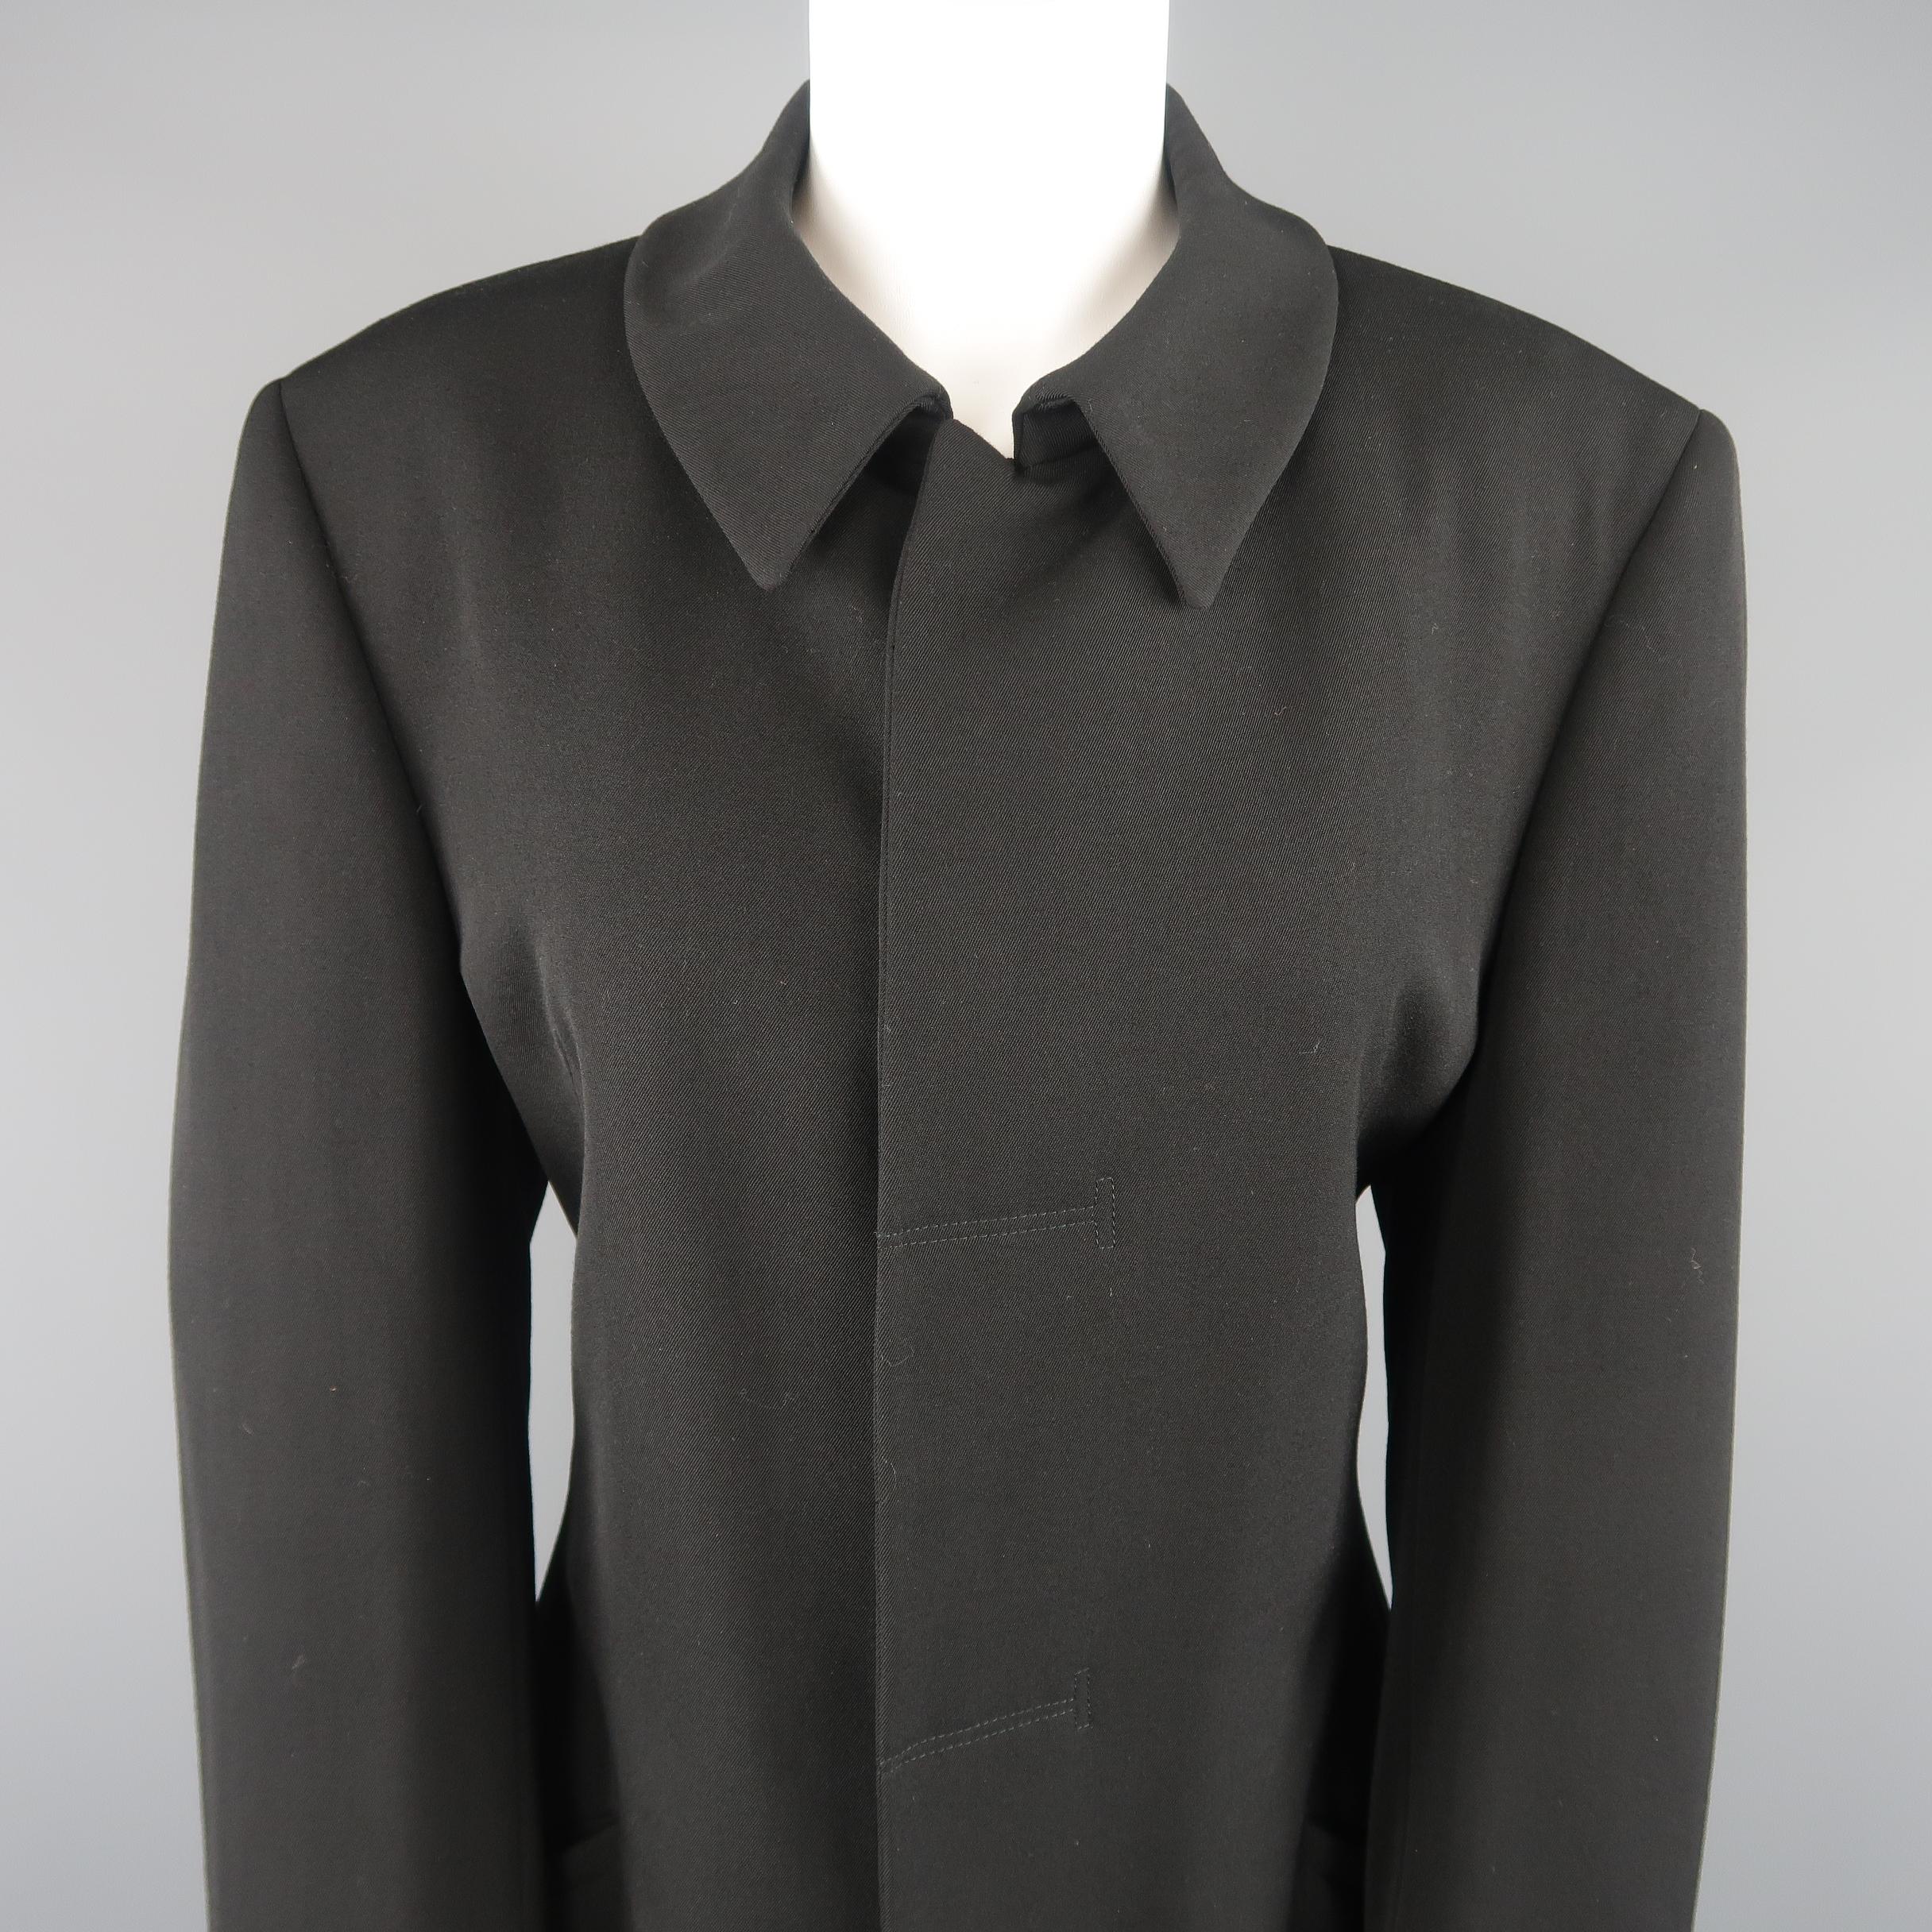 GIORGIO ARMANI car coat comes in black wool twill with a pointed collar, slanted pockets, and hidden placket snap closures. Made in Italy.
 
Good Pre-Owned Condition.
Marked: IT 48
 
Measurements:
 
Shoulder: 18 in.
Bust: 42 in.
Waist: 27